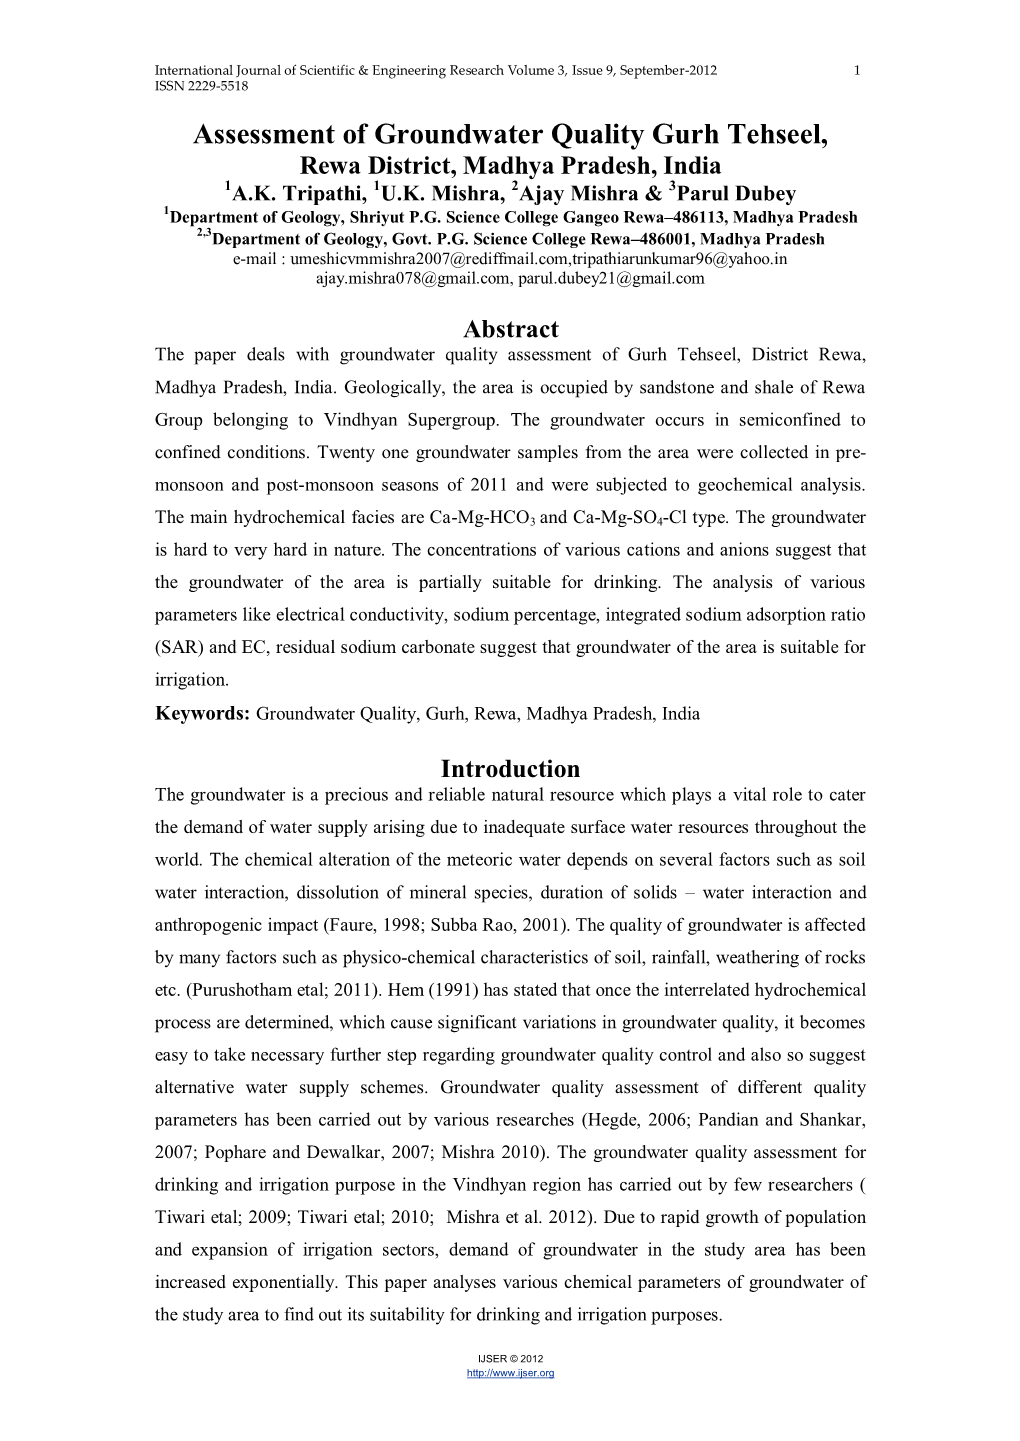 Assessment of Groundwater Quality Gurh Tehseel, Rewa District, Madhya Pradesh, India 1A.K